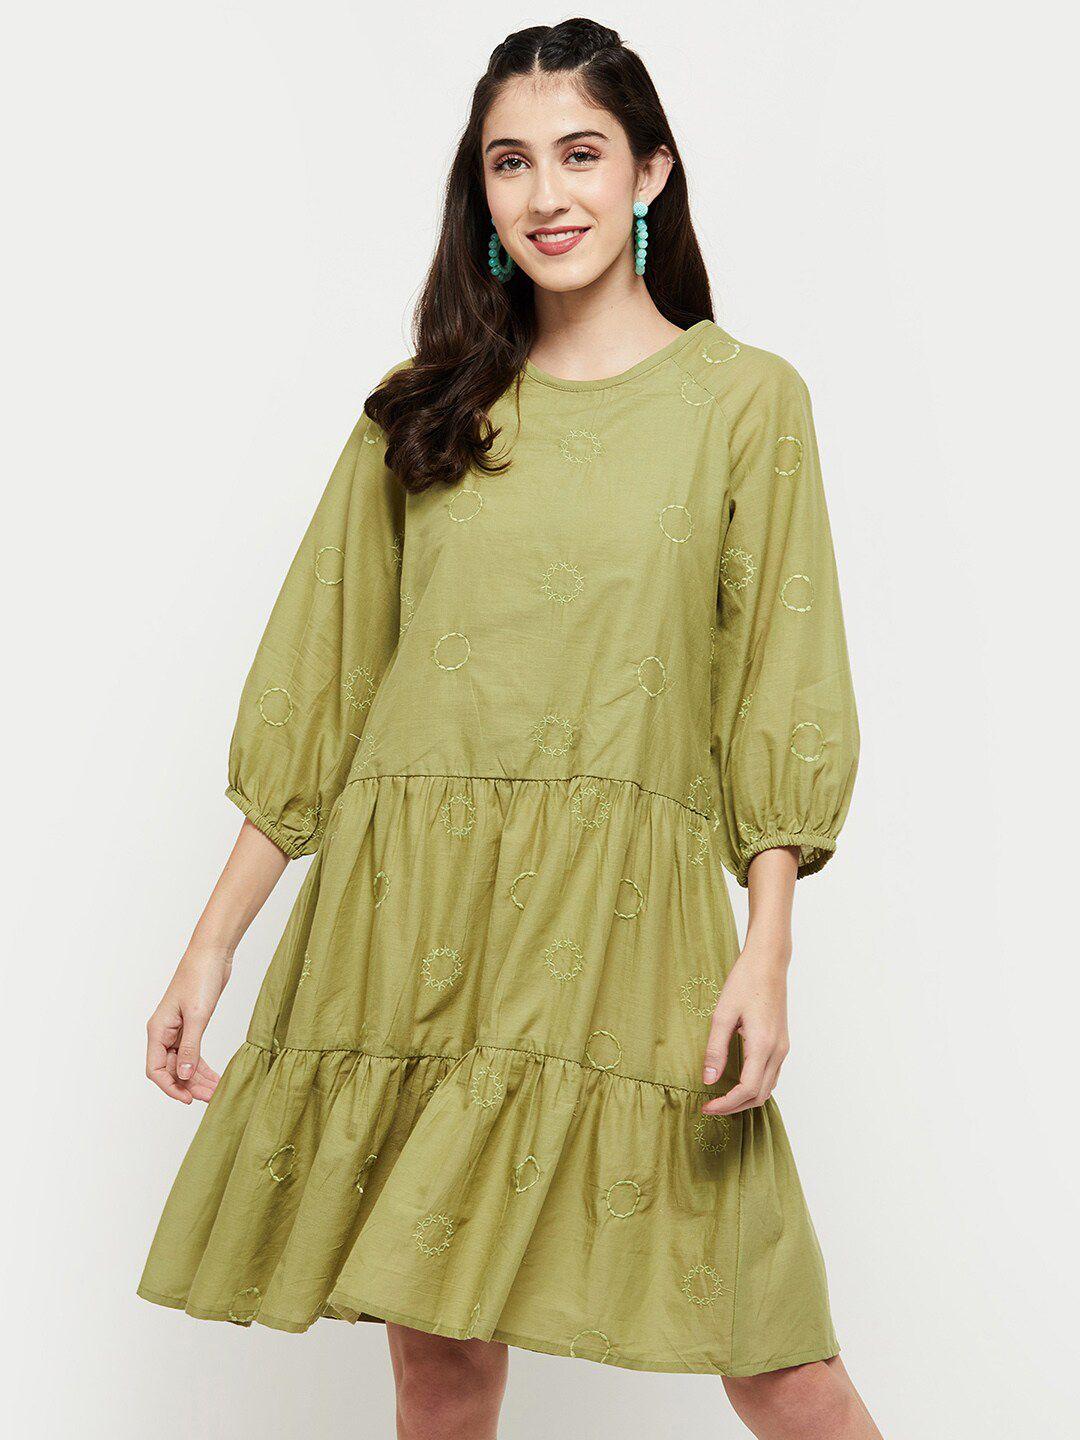 max green geometric embroidered a-line dress